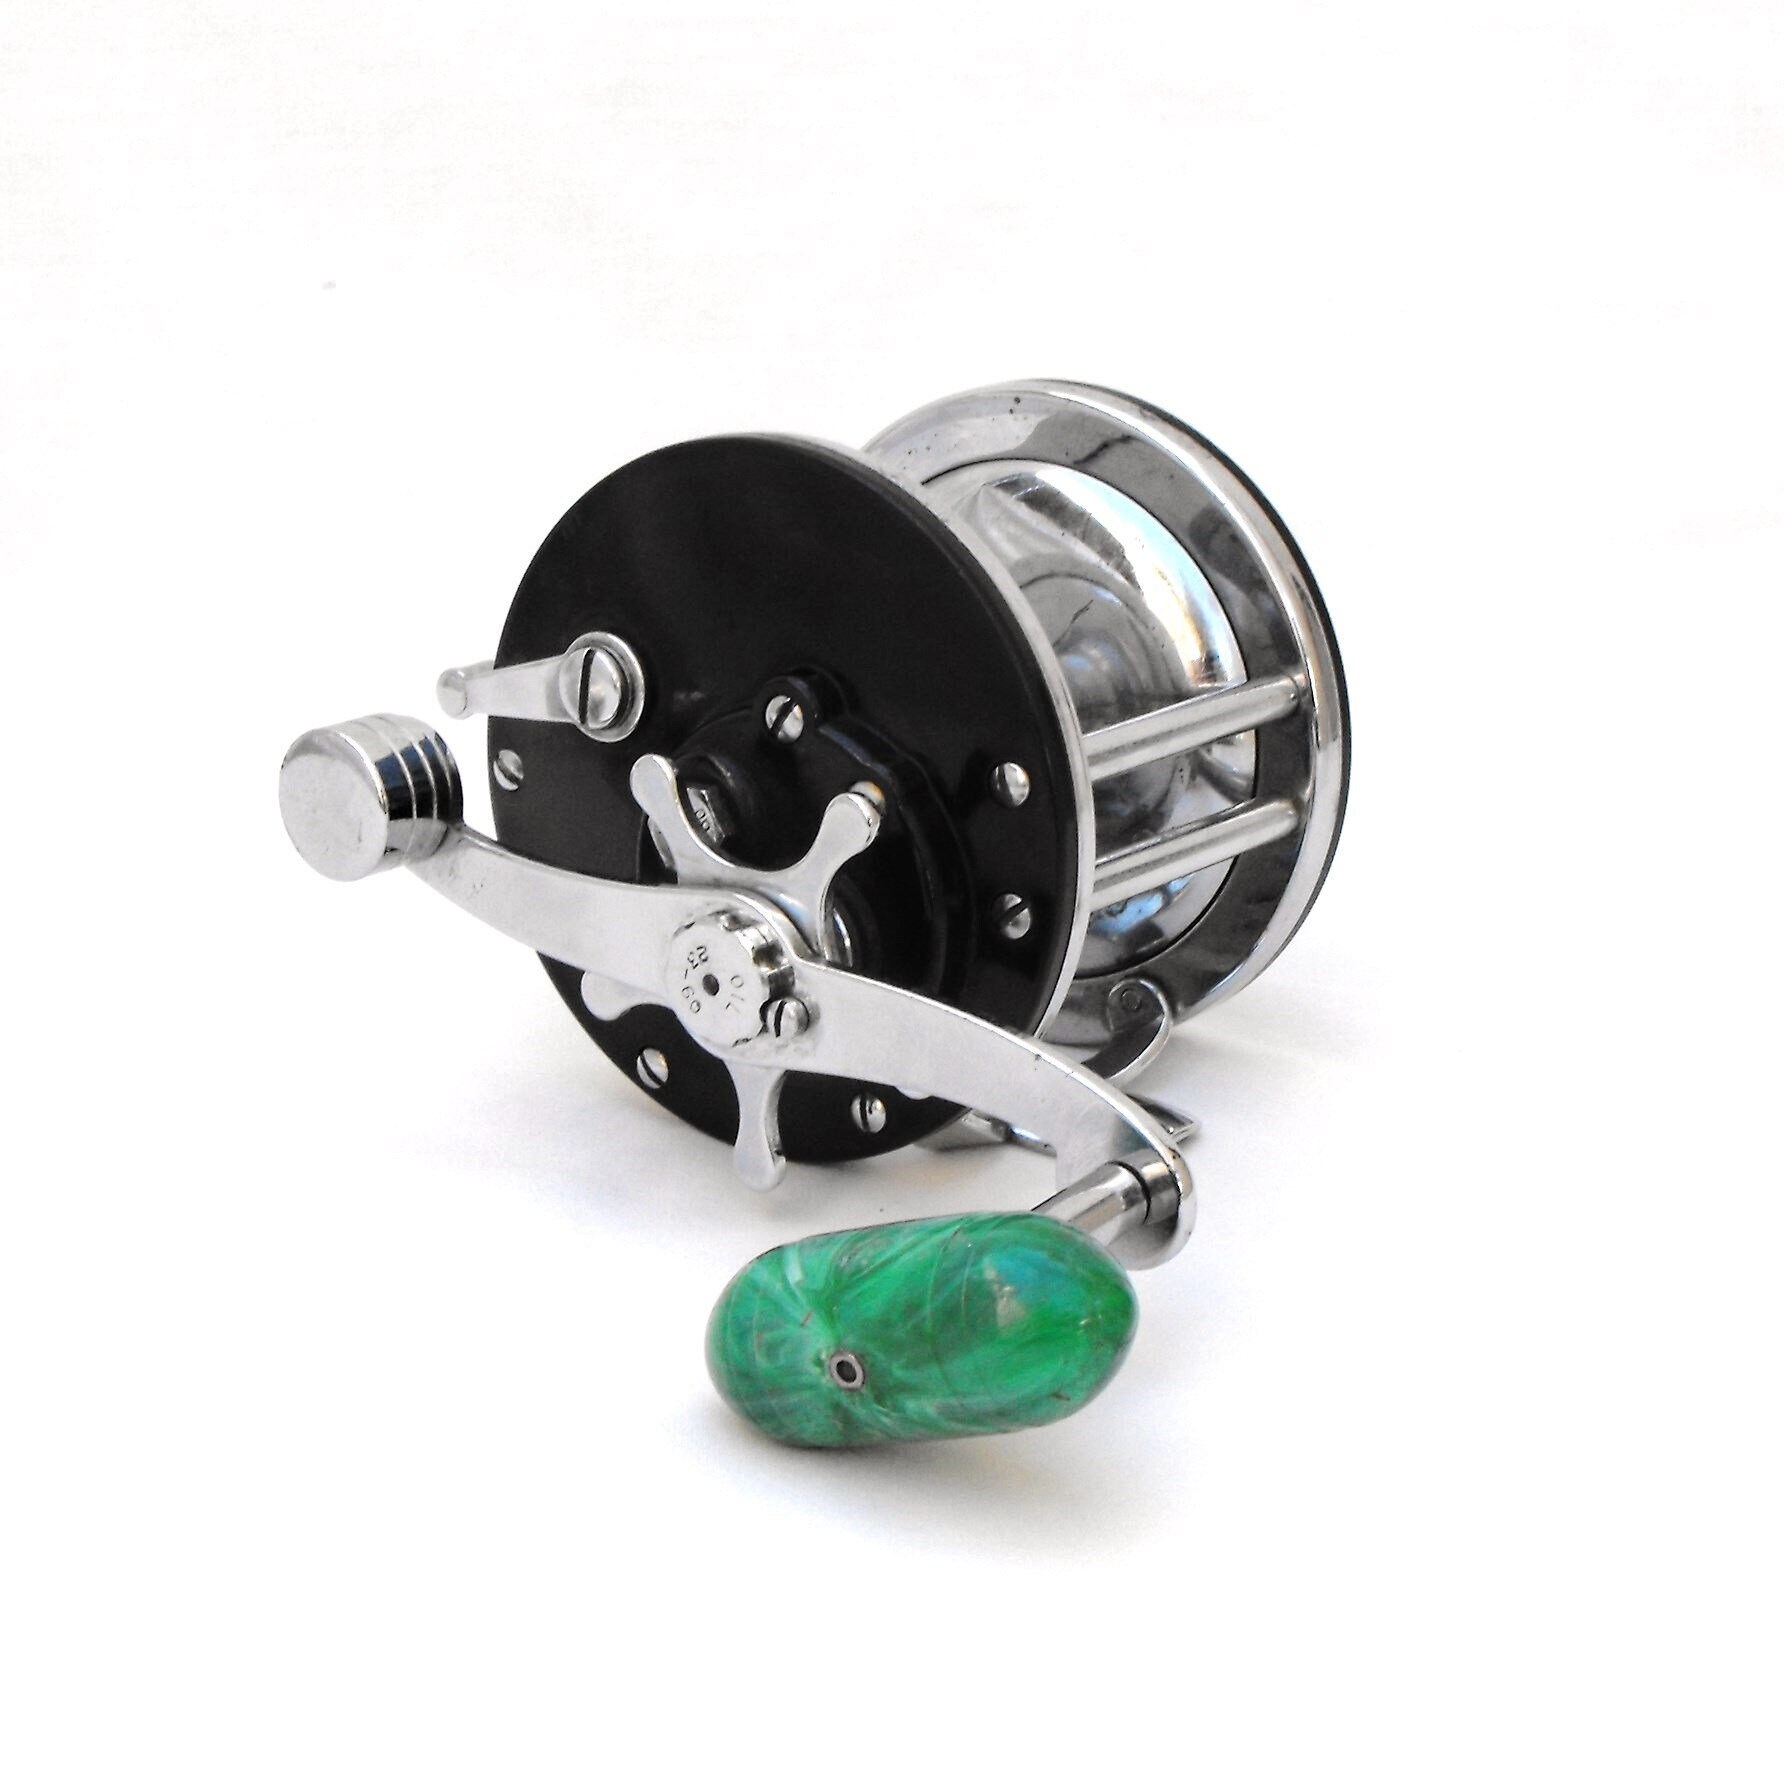 PENN PEER No.109 Fishing reel is handle suppose to move when in free spool  - Main Forum - SurfTalk